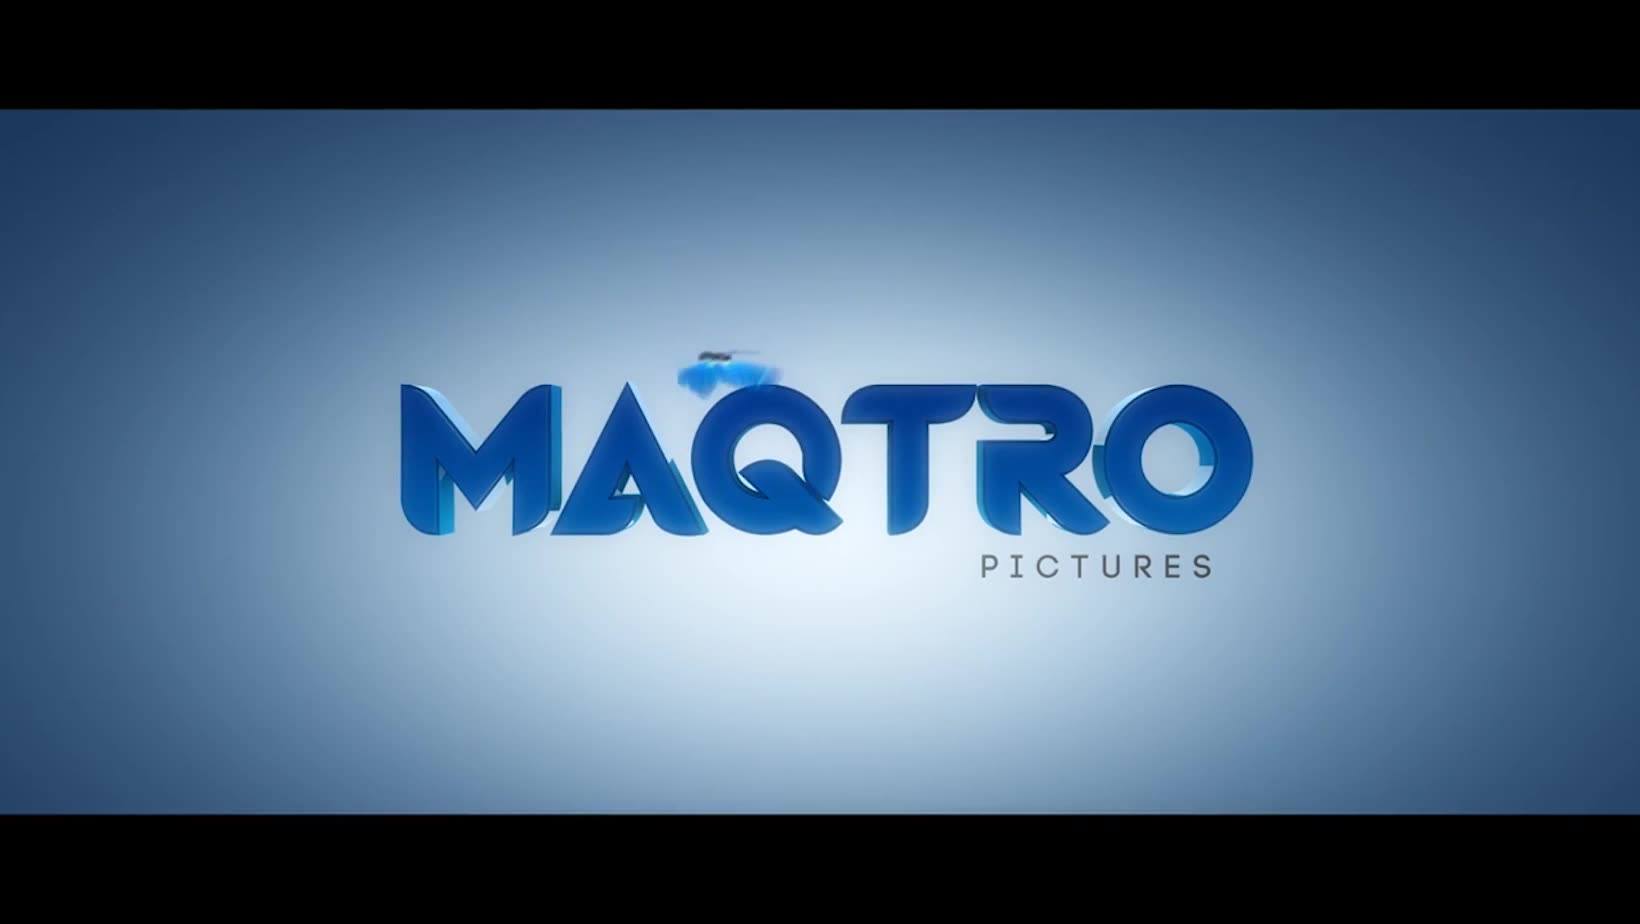 Maqtro Pictures